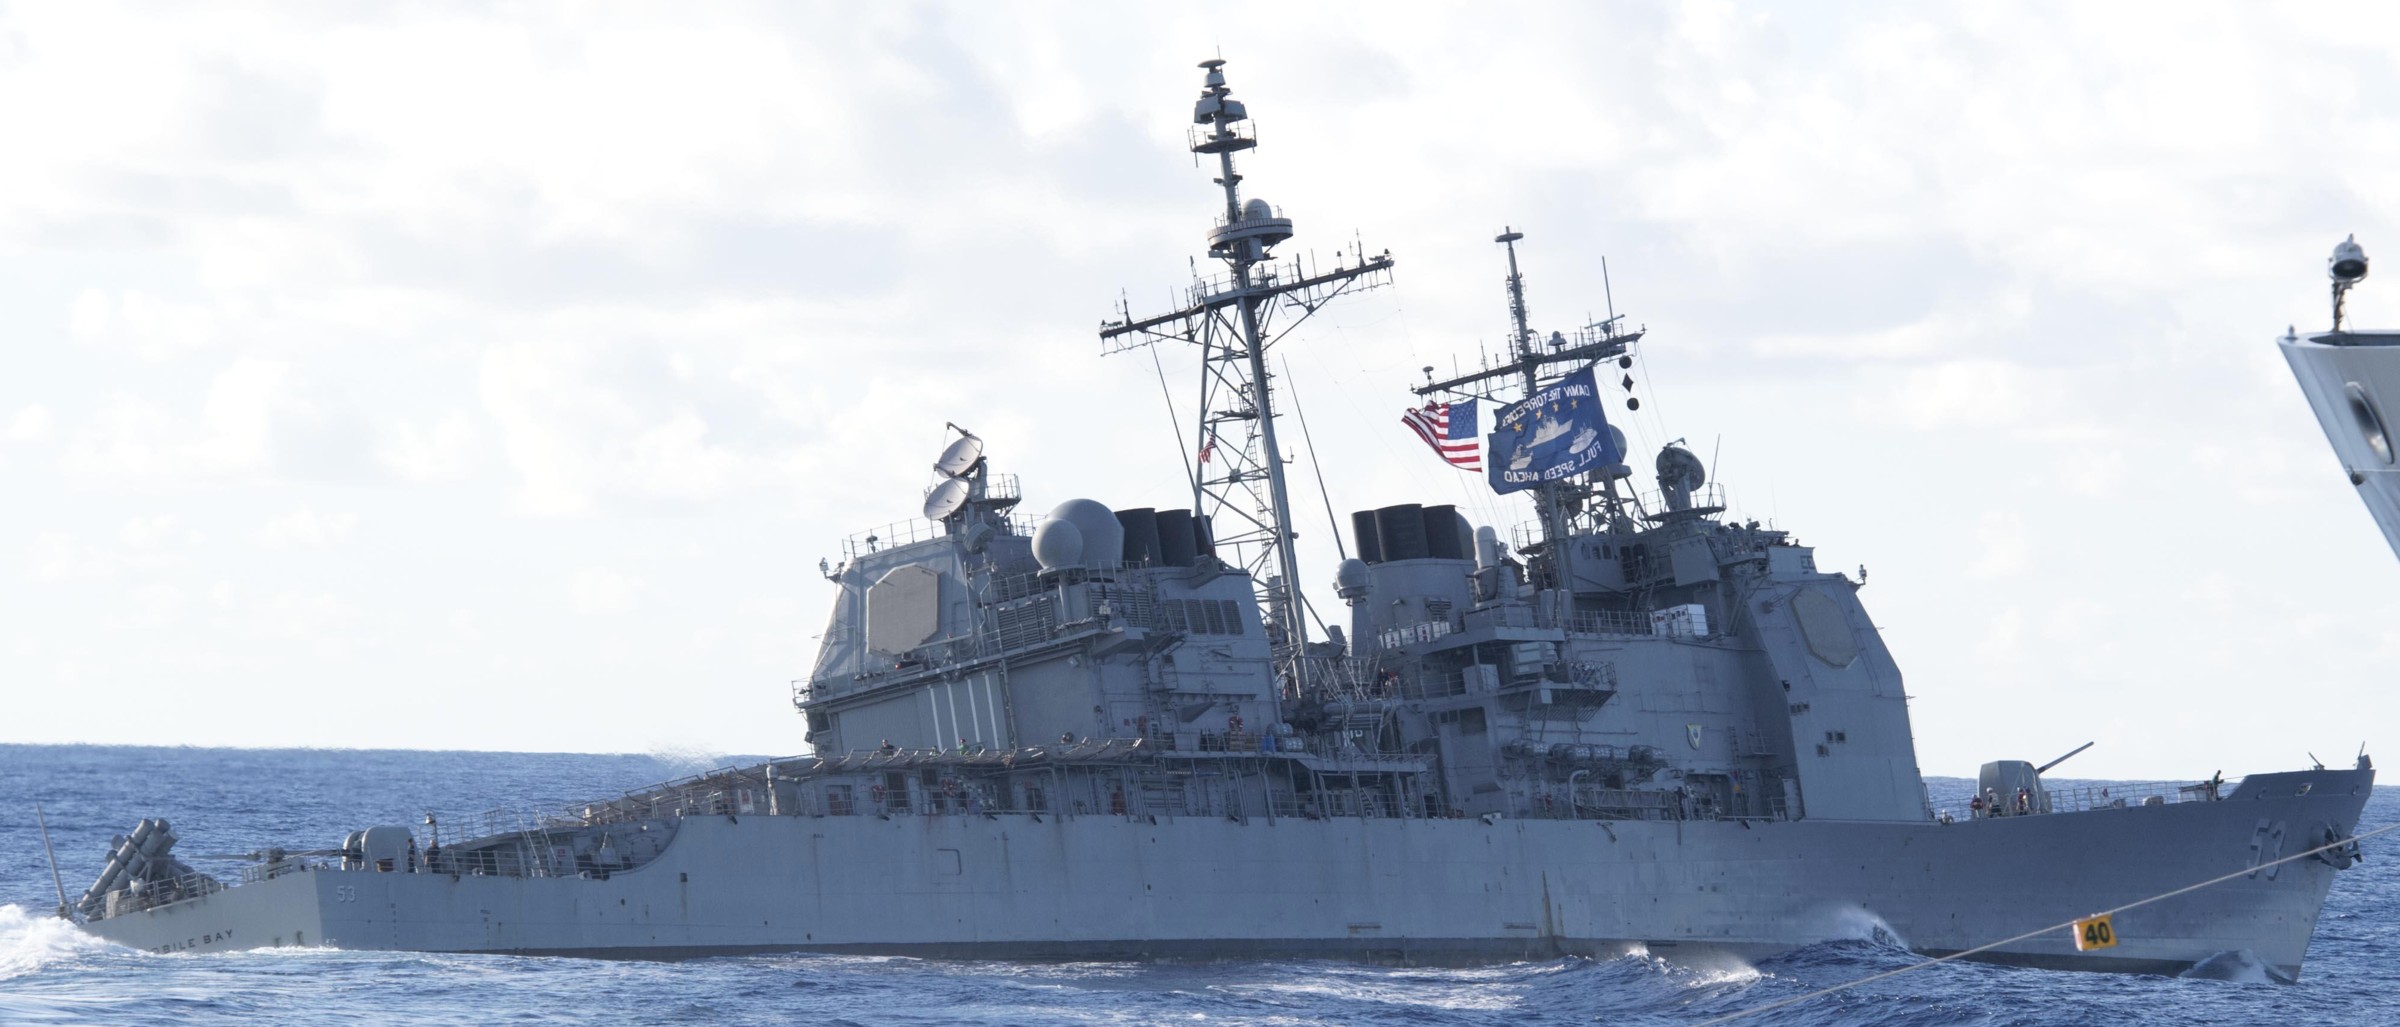 cg-53 uss mobile bay ticonderoga class guided missile cruiser aegis us navy 116